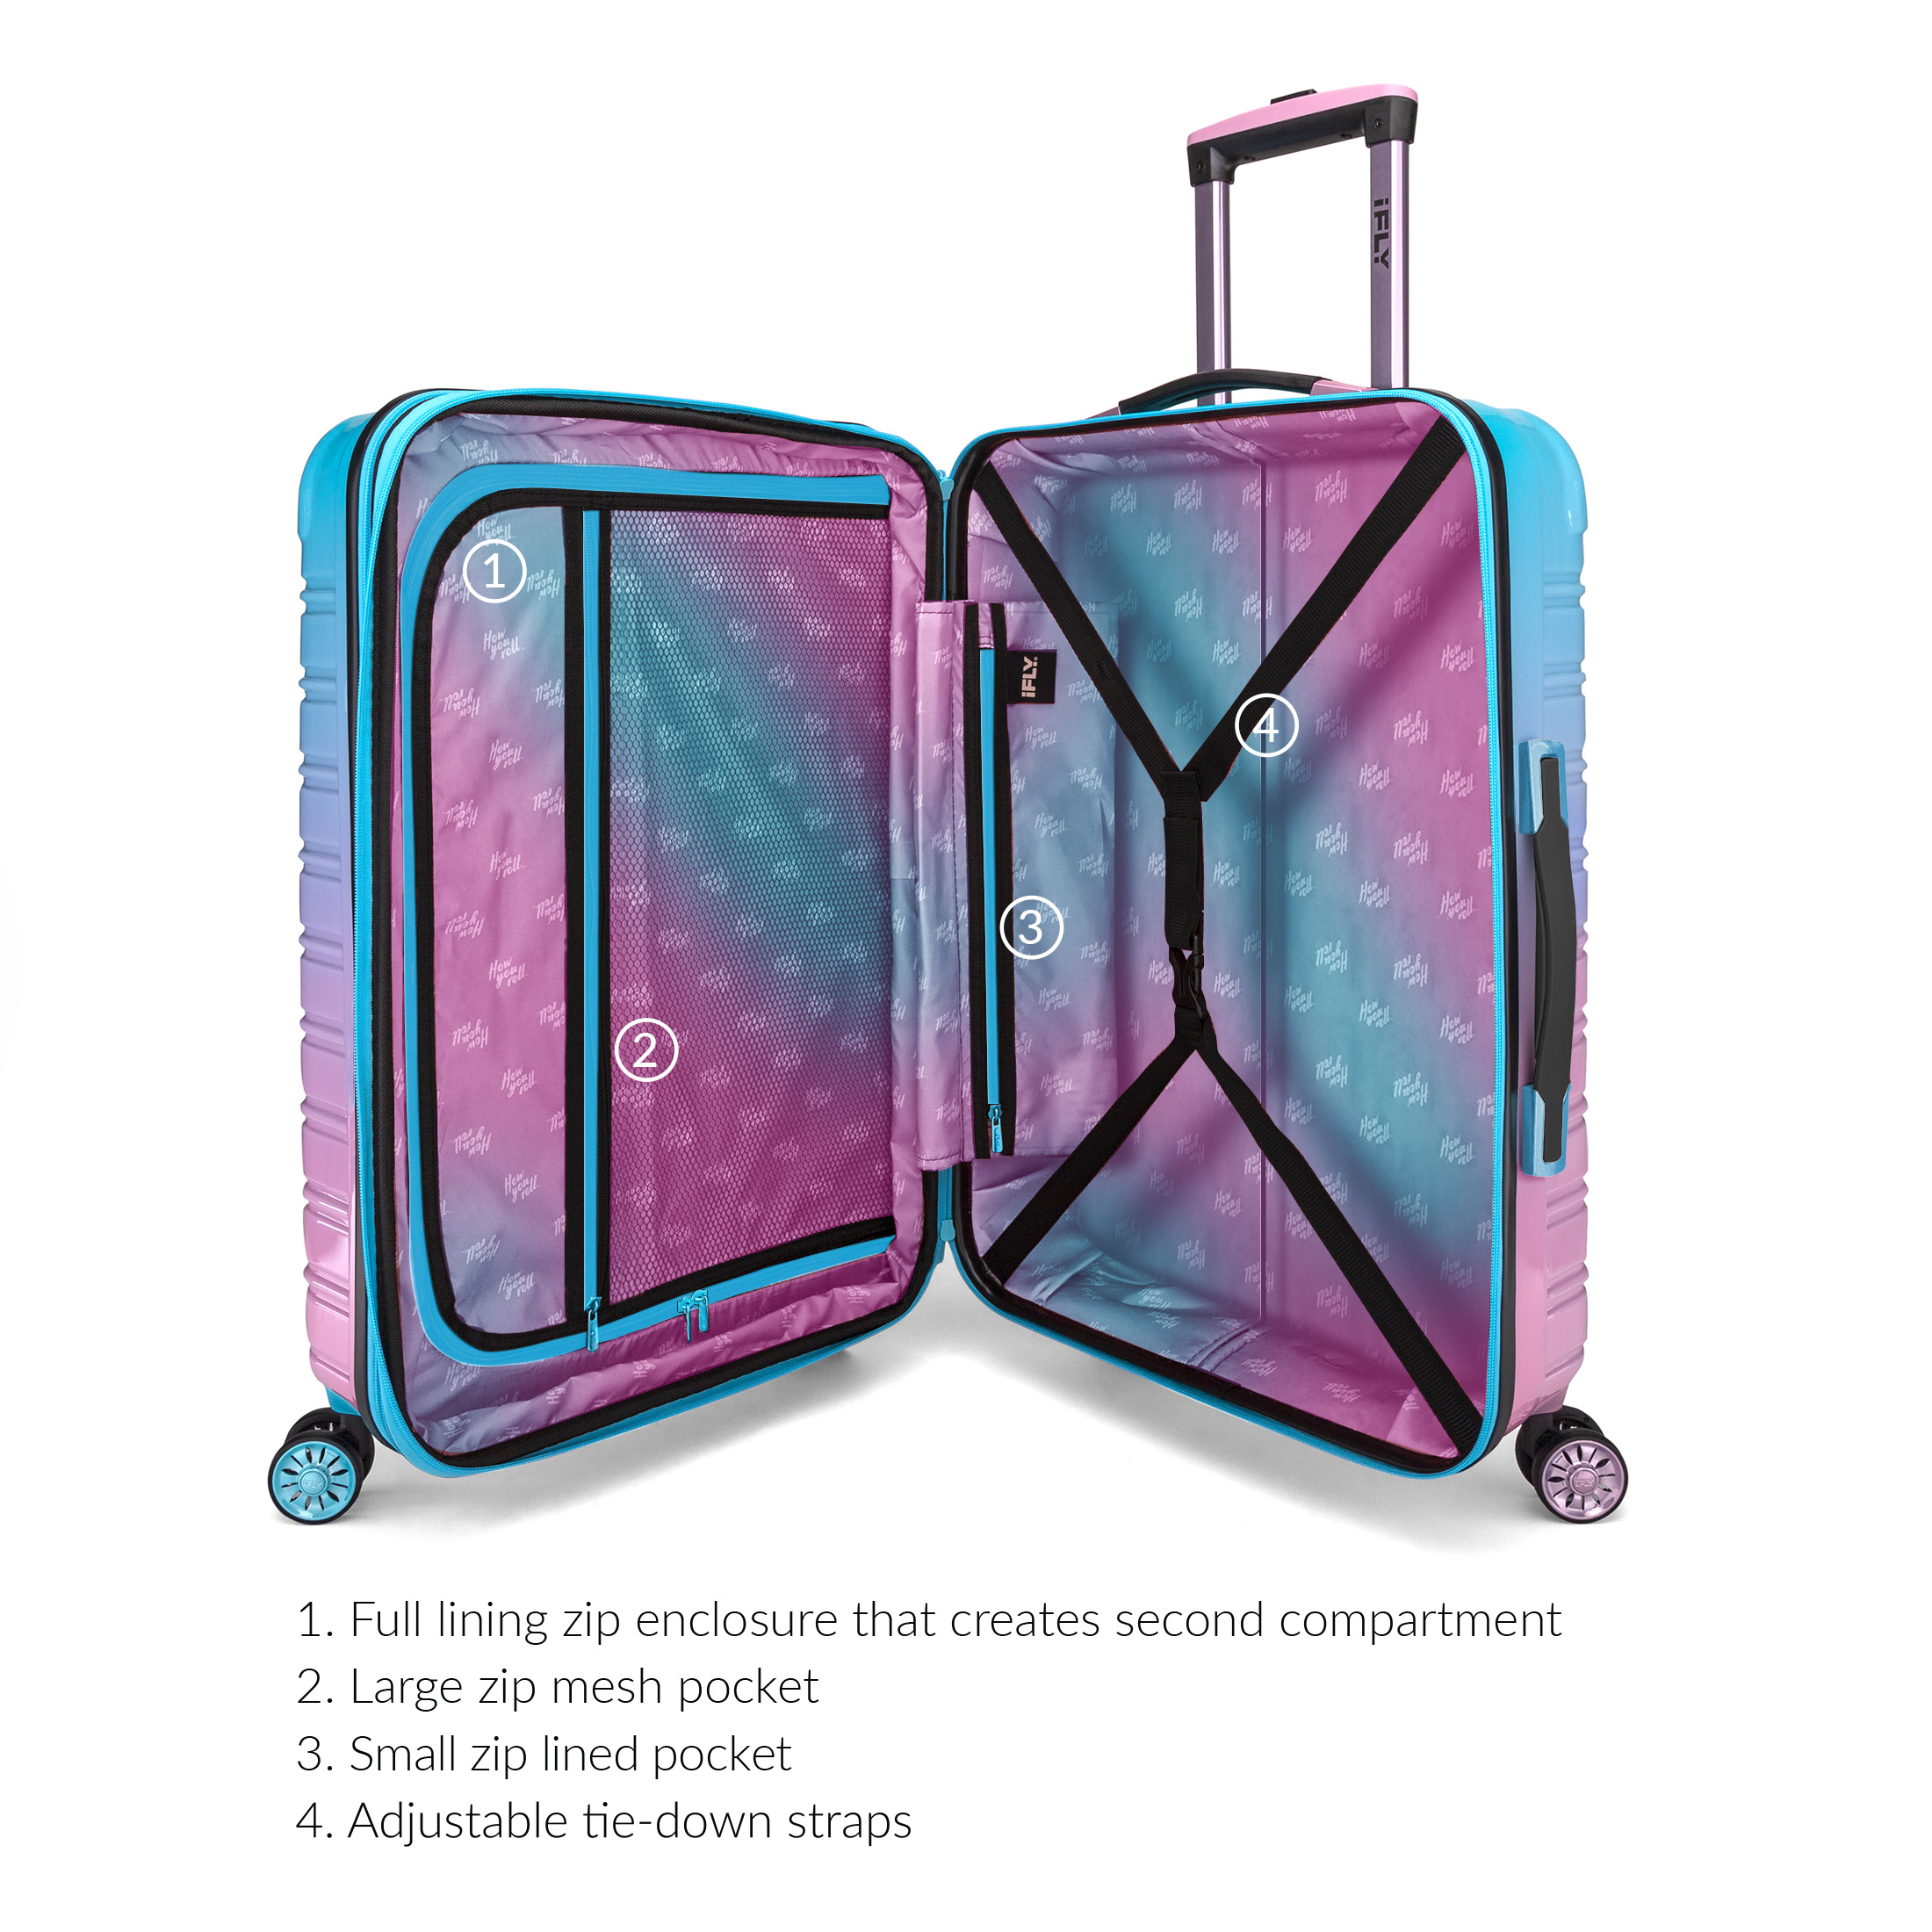 iFLY Hardside Fibertech Luggage 20" Carry-on Luggage, Cotton Candy - image 5 of 10